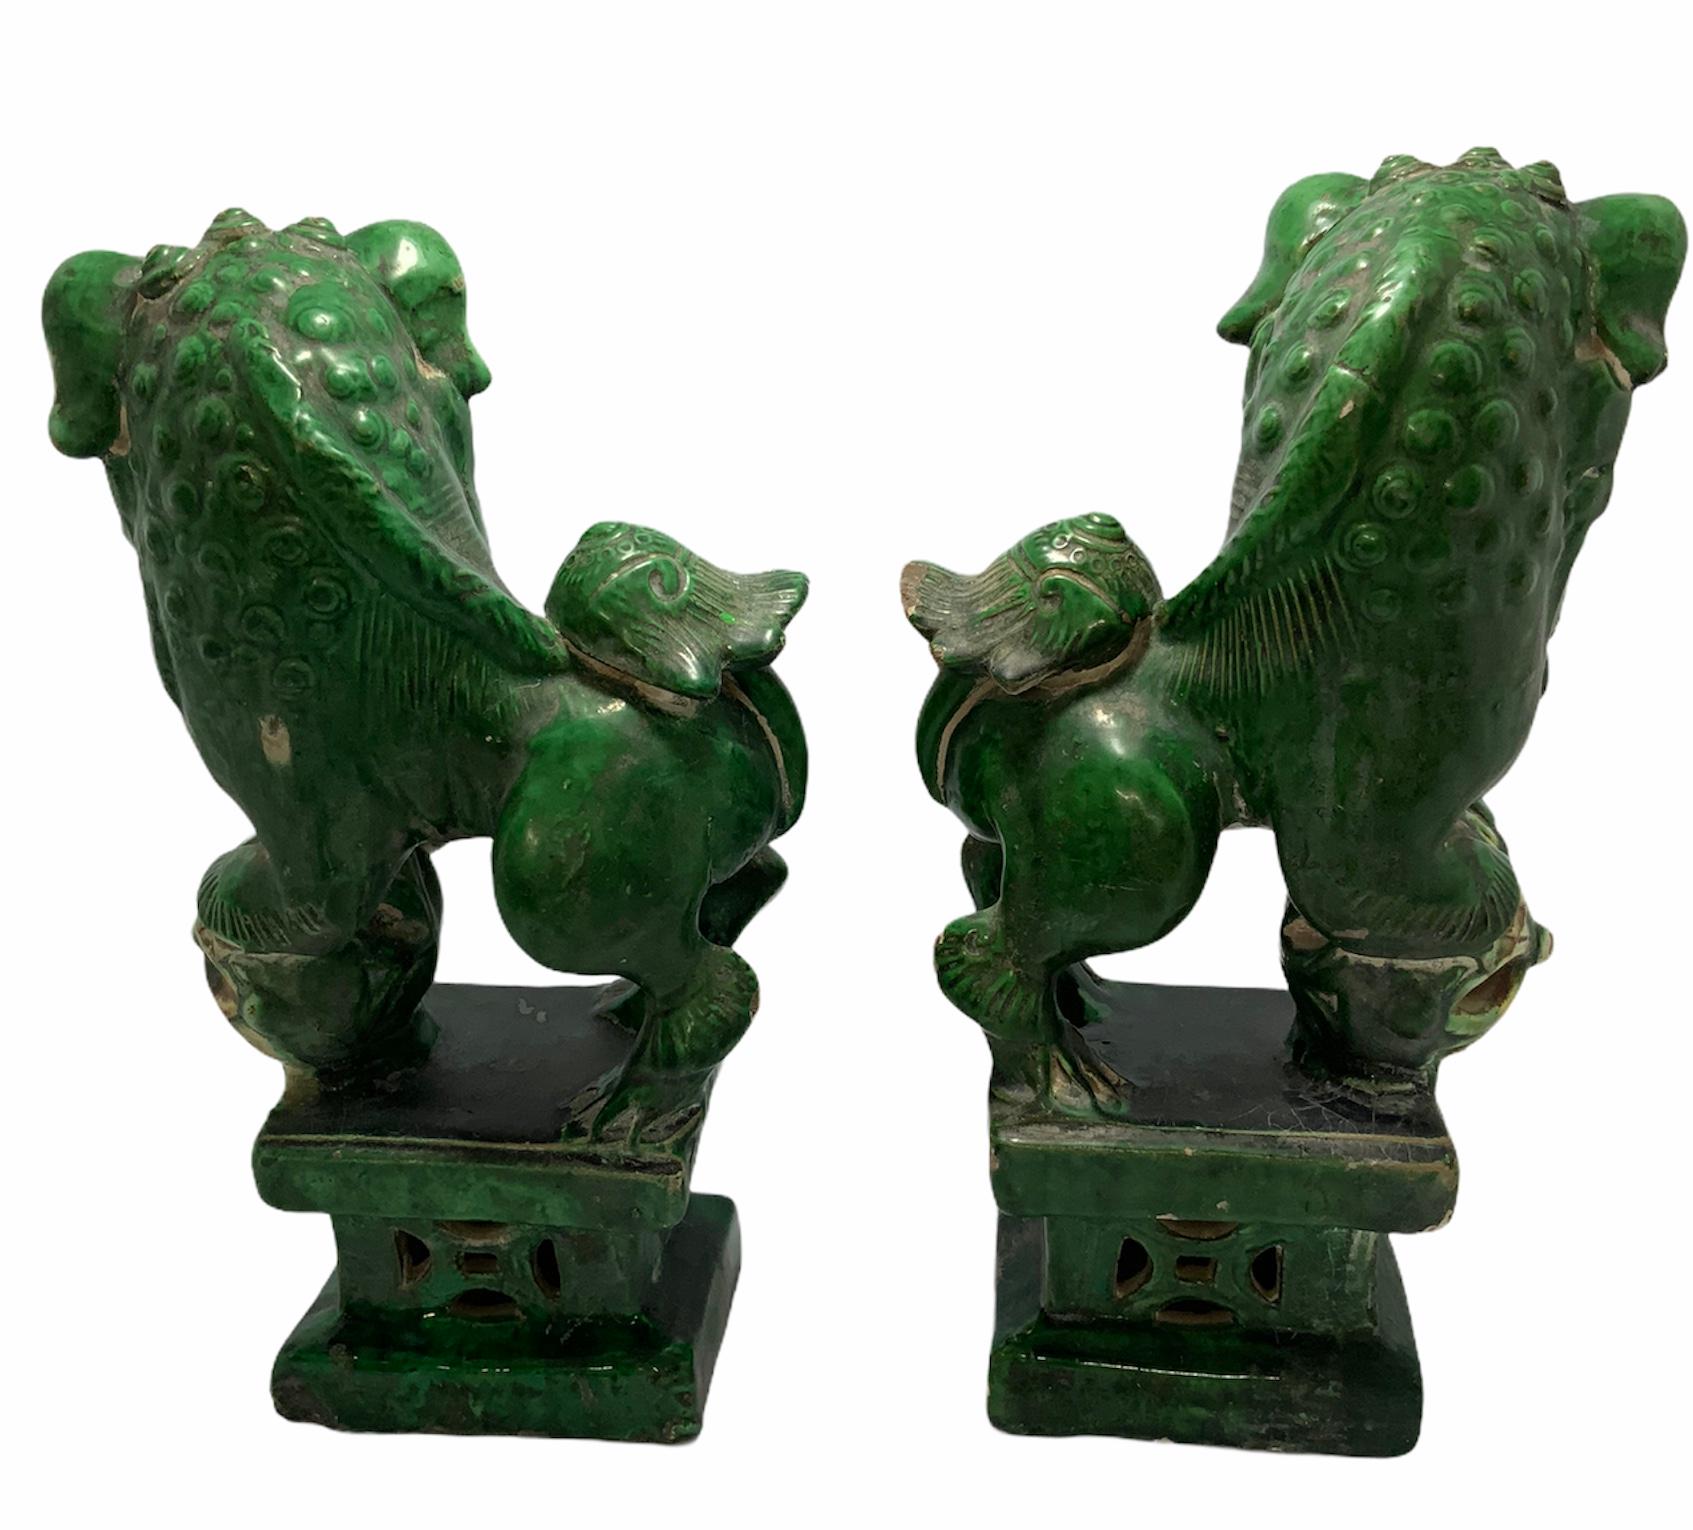 These are two medium size and heavy ceramic Chinese sculptures of foo dogs that are playing with a ball that sounds like bells. They are hand painted green, yellow, and brown color. In Chinese culture foo dogs are lions that represent the yin